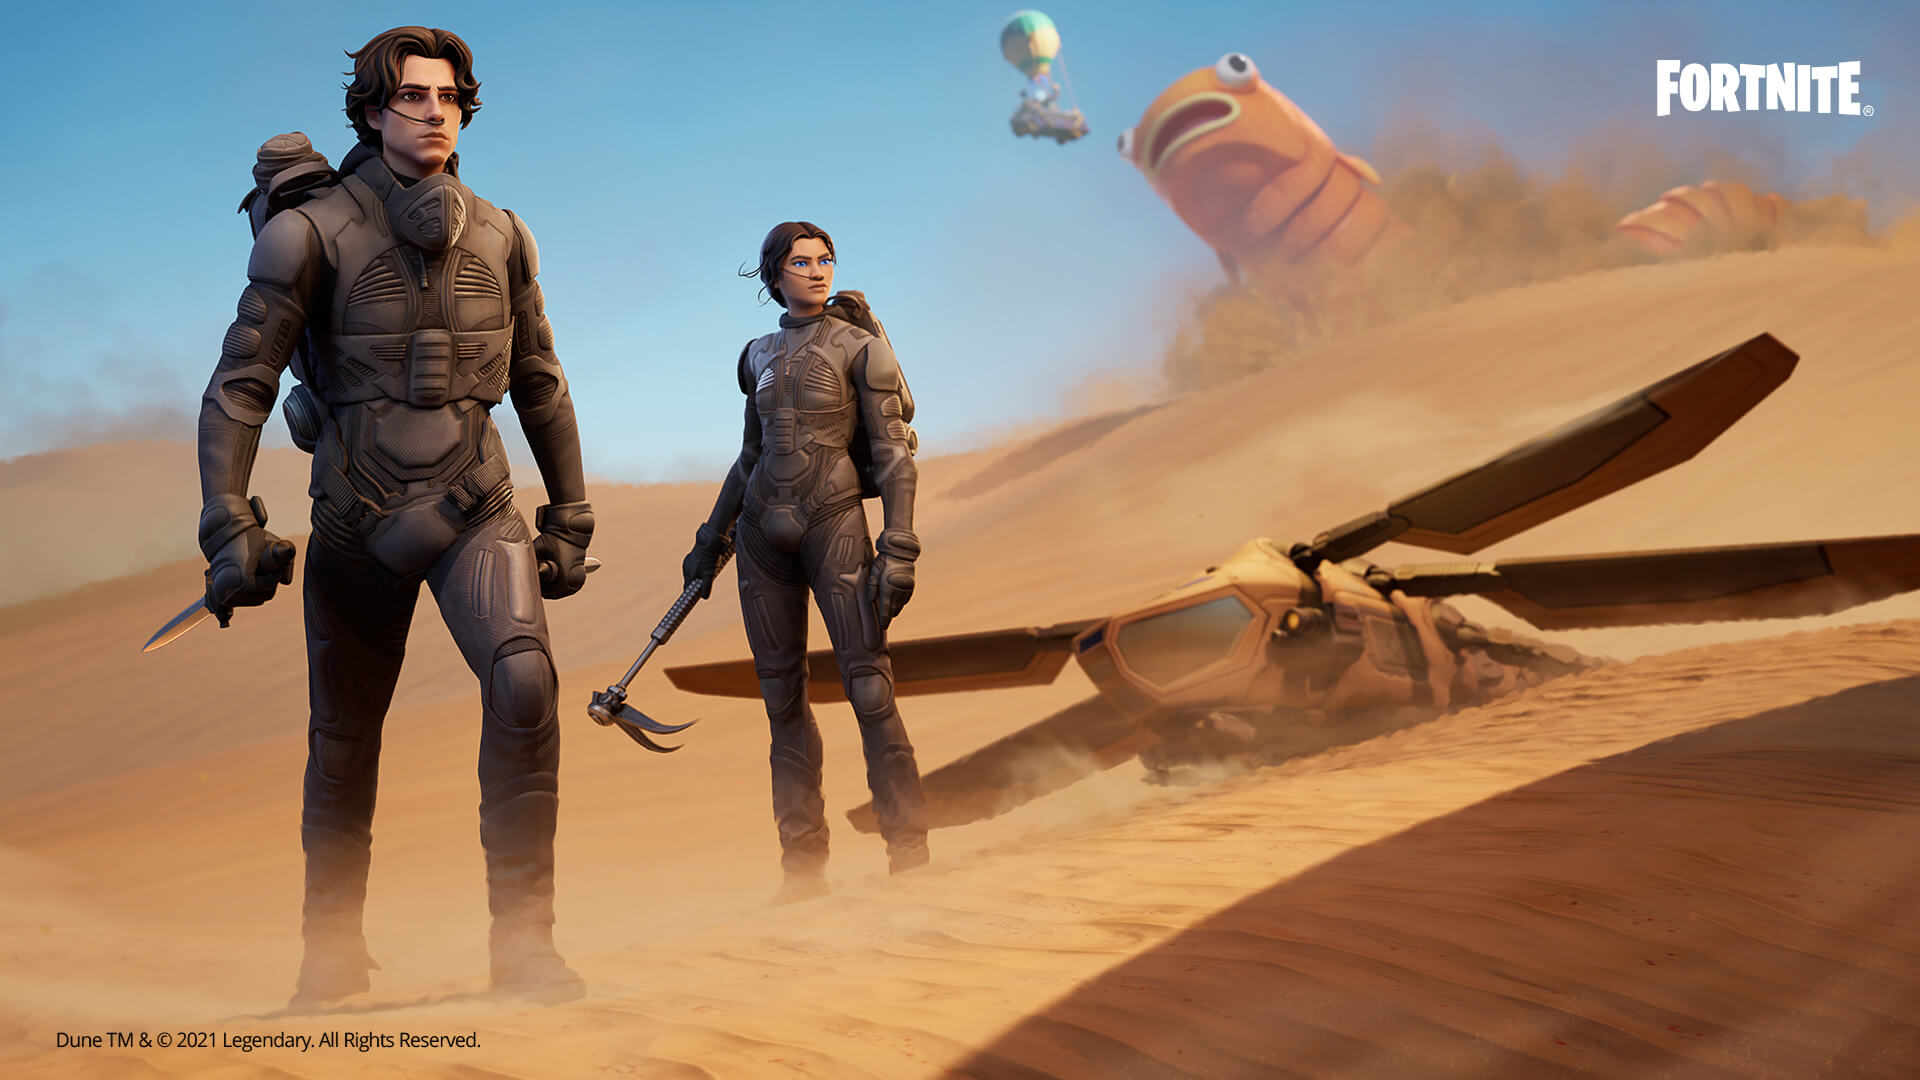 Fortnite officially announces Dune collaboration